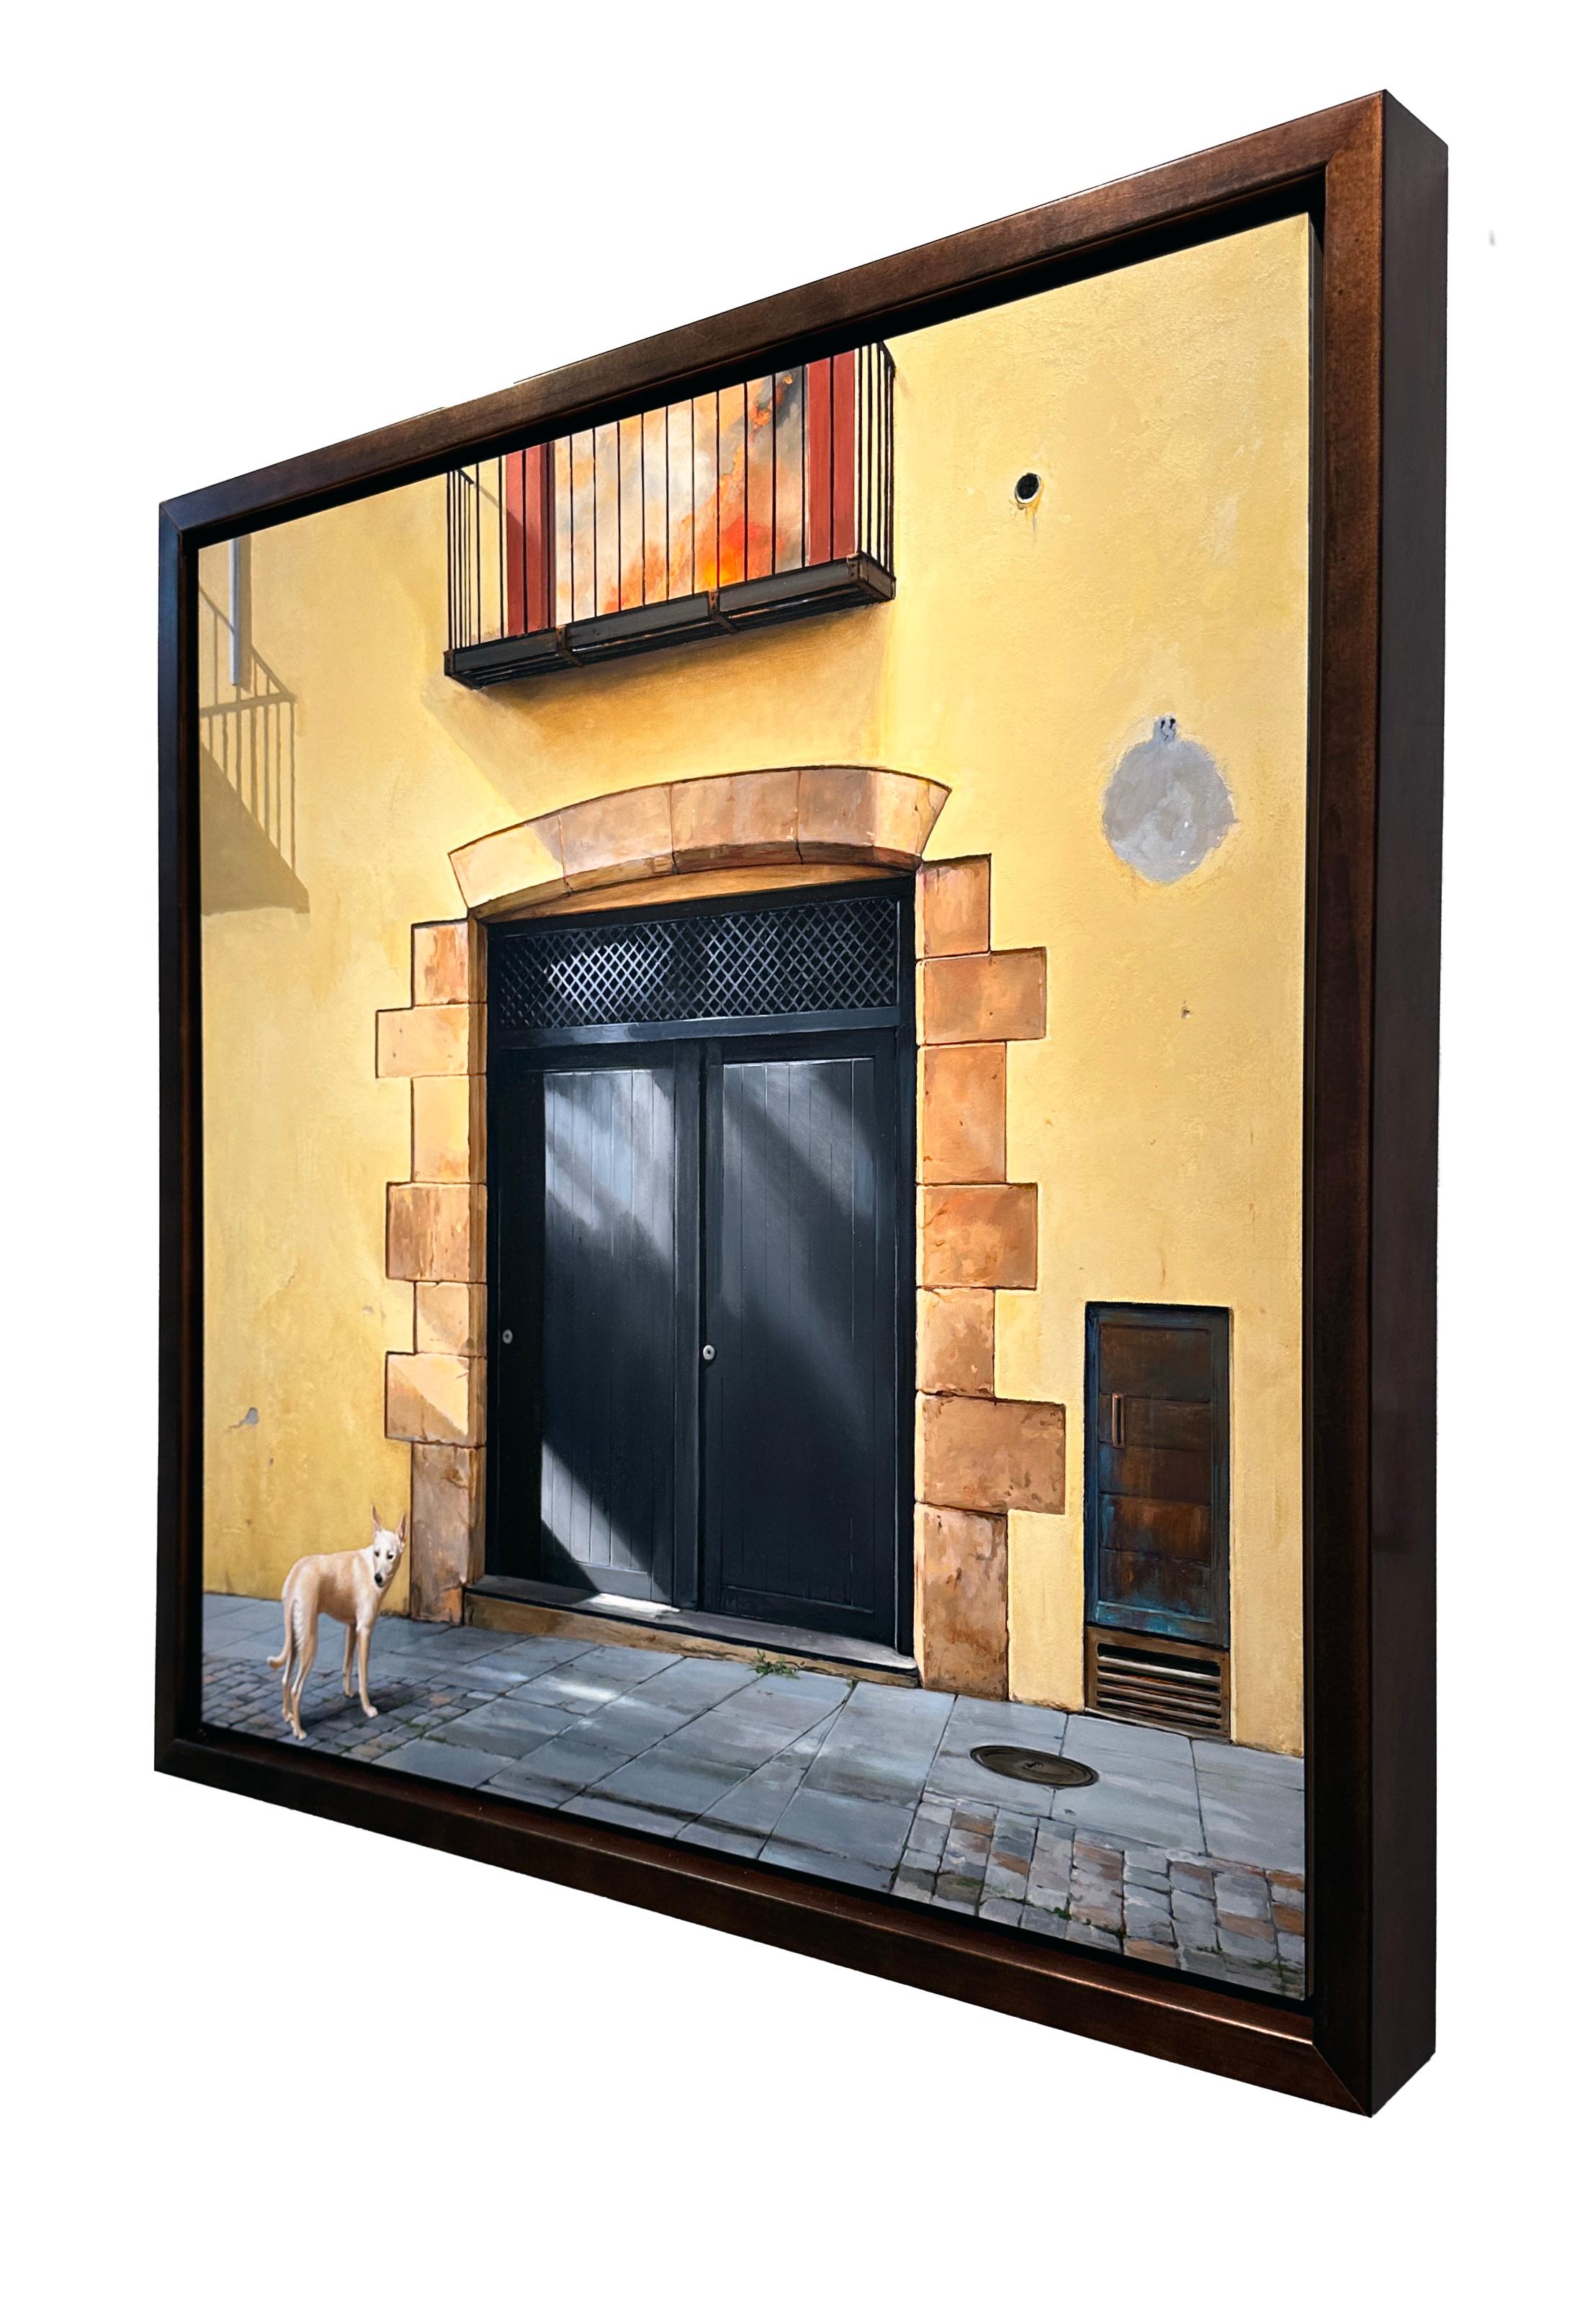 Sombras des Caldes (The Shadows of Caldes) - Architectural Imagery and a Dog  For Sale 4